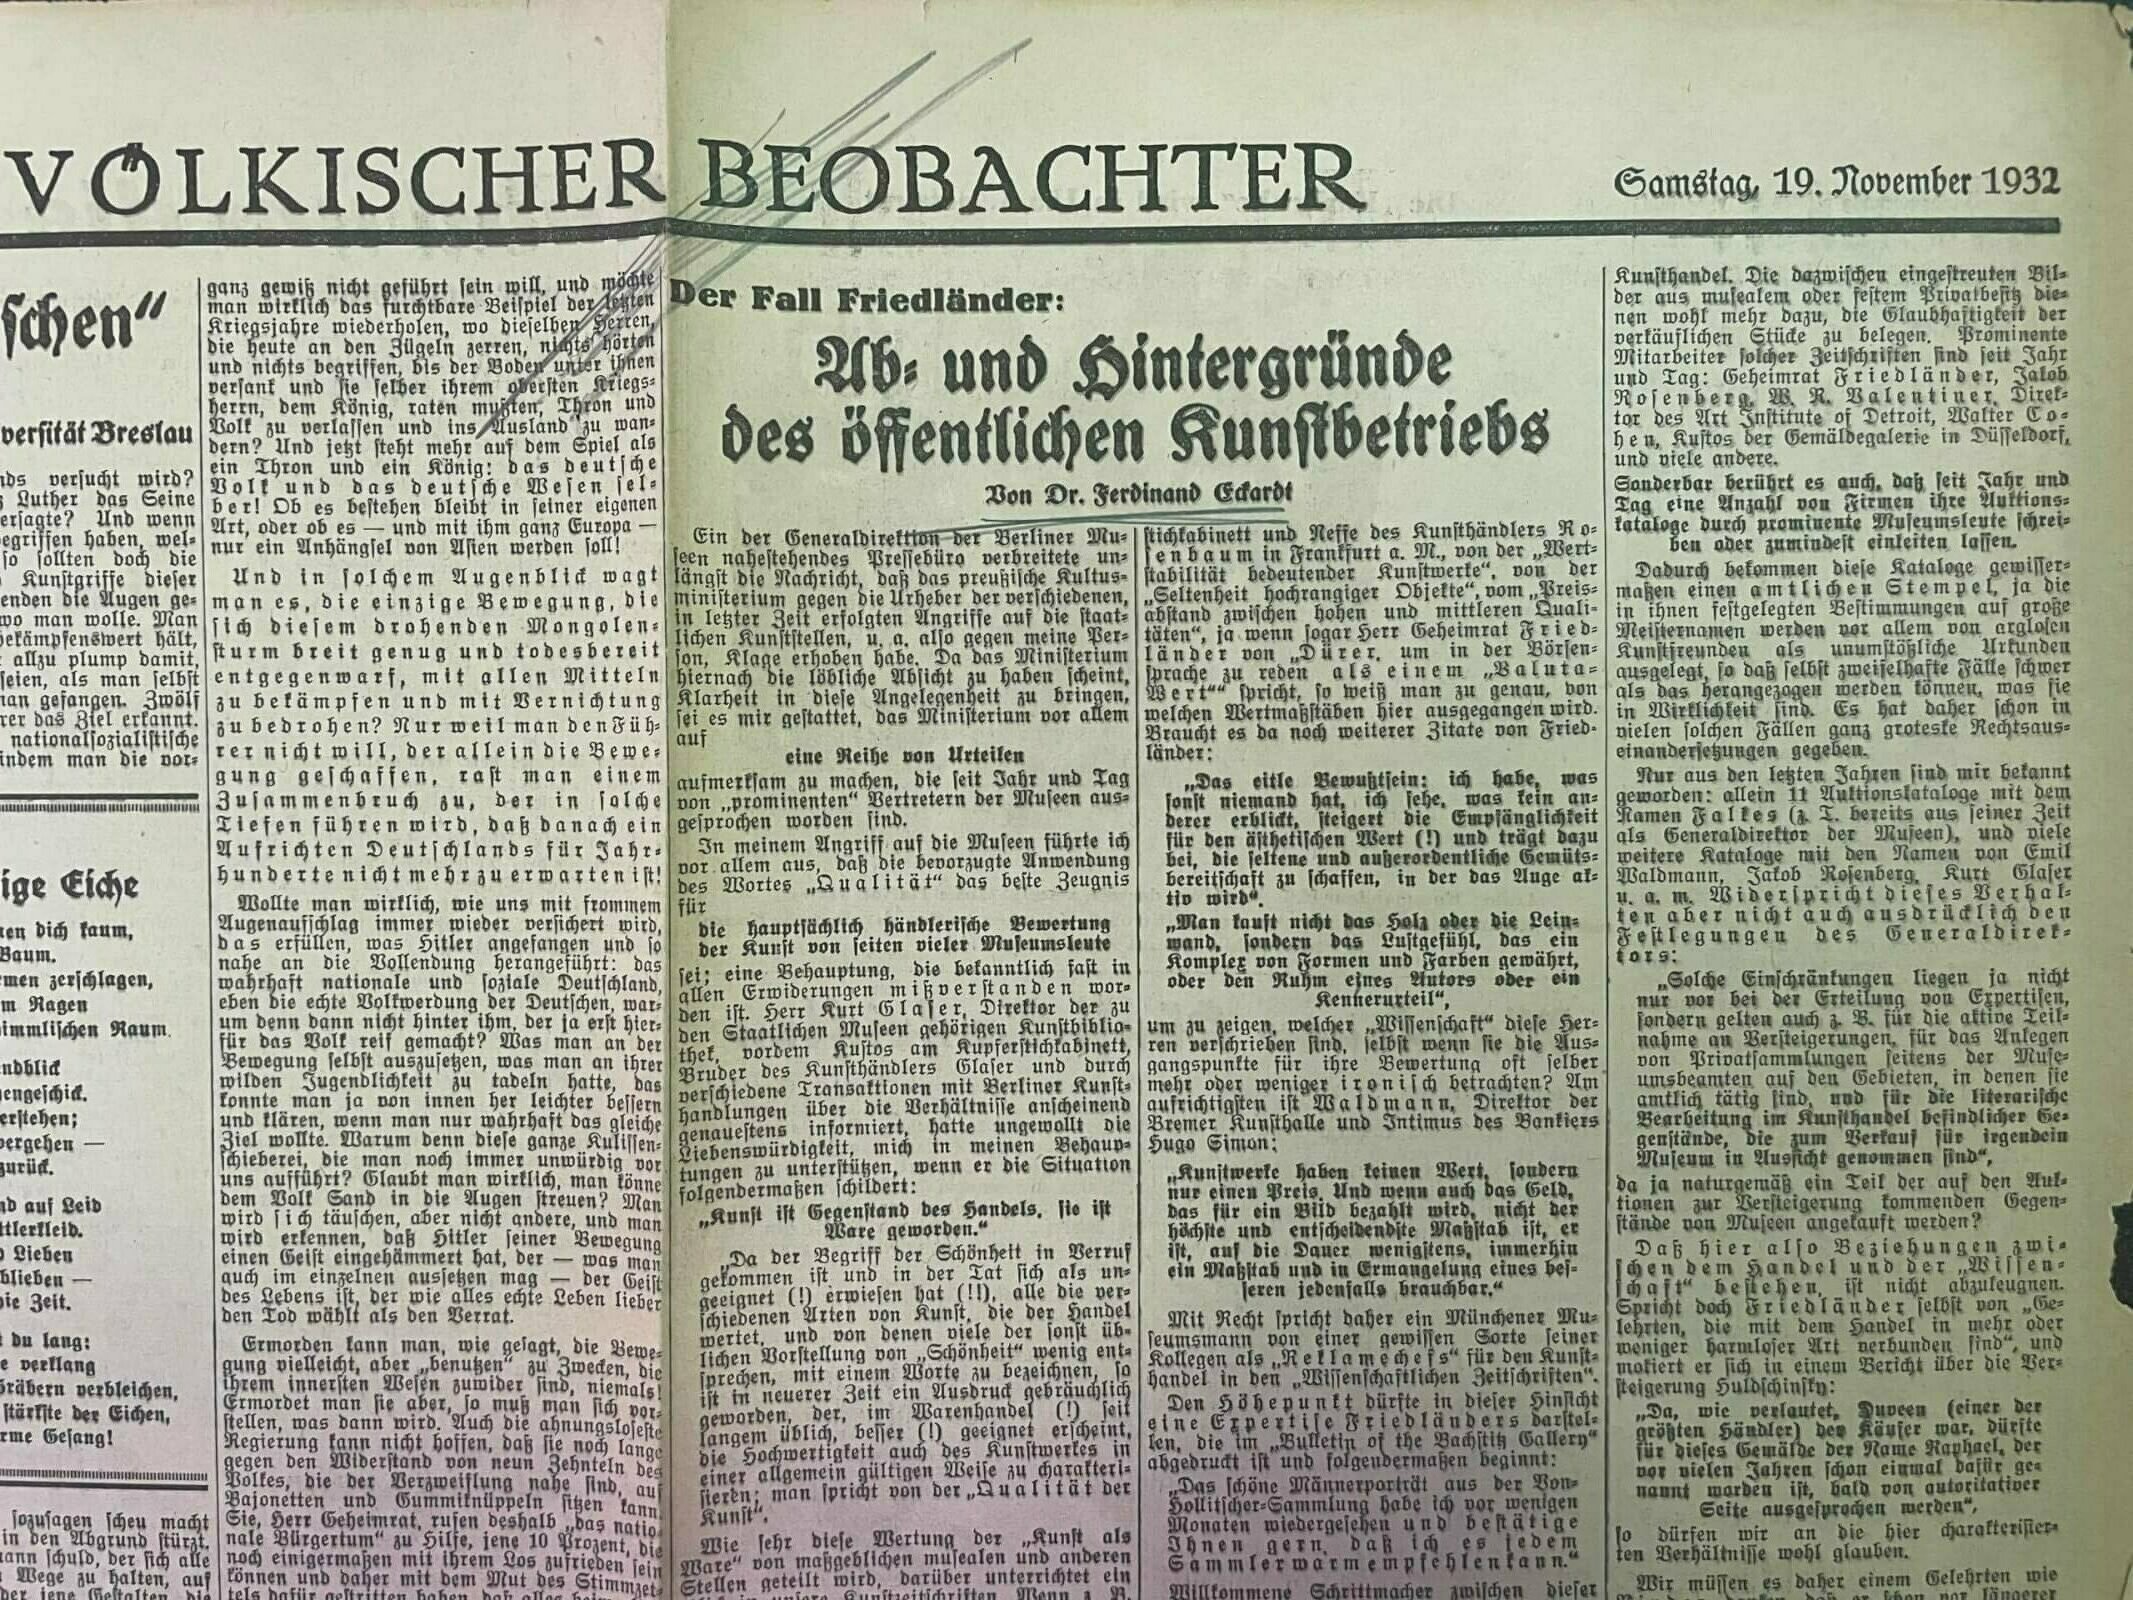 Eckhardt’s copy of his Volkischer Beobachter (Nazi newspaper) article, which he admits to submitting to the newspaper.